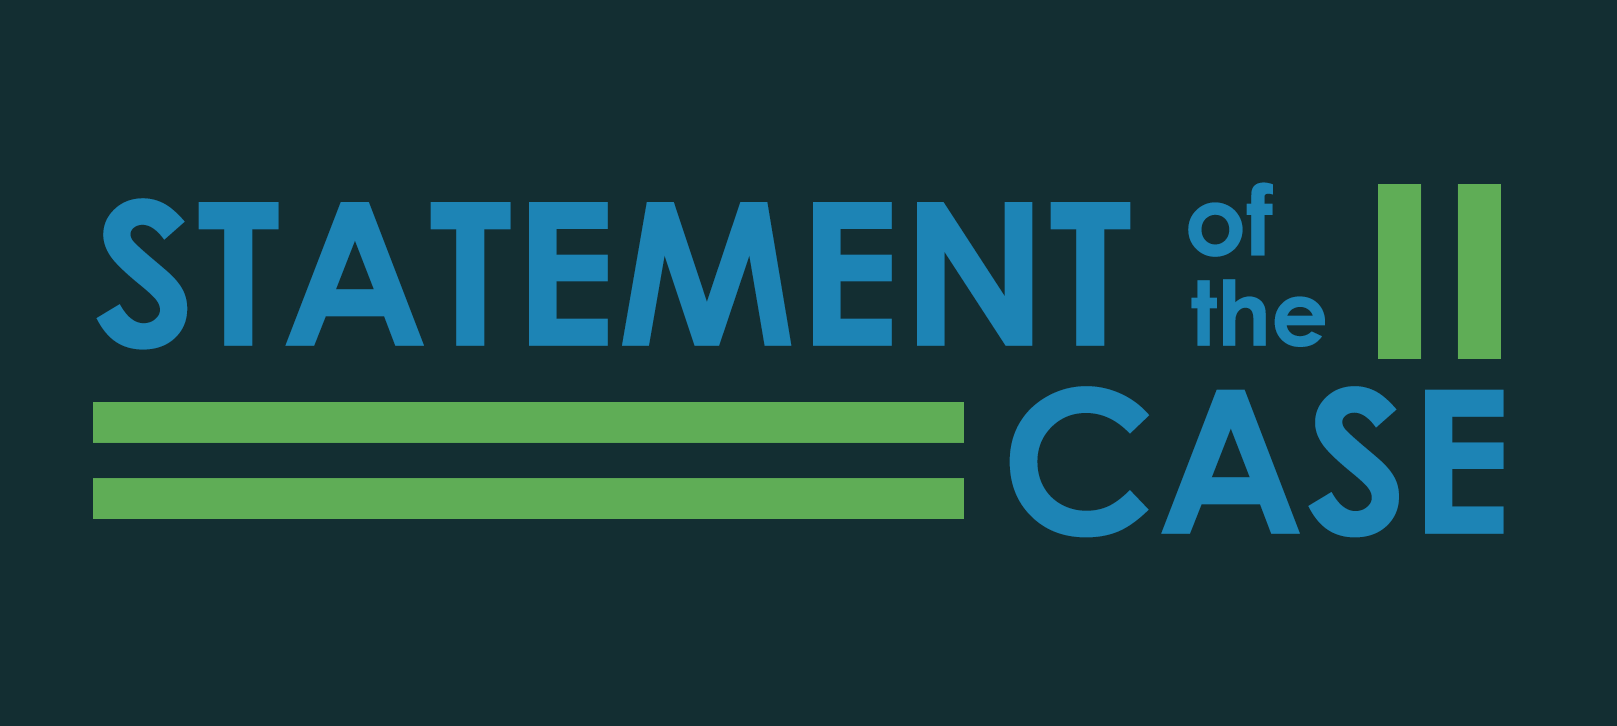 What is a Statement of the Case (SOC)?